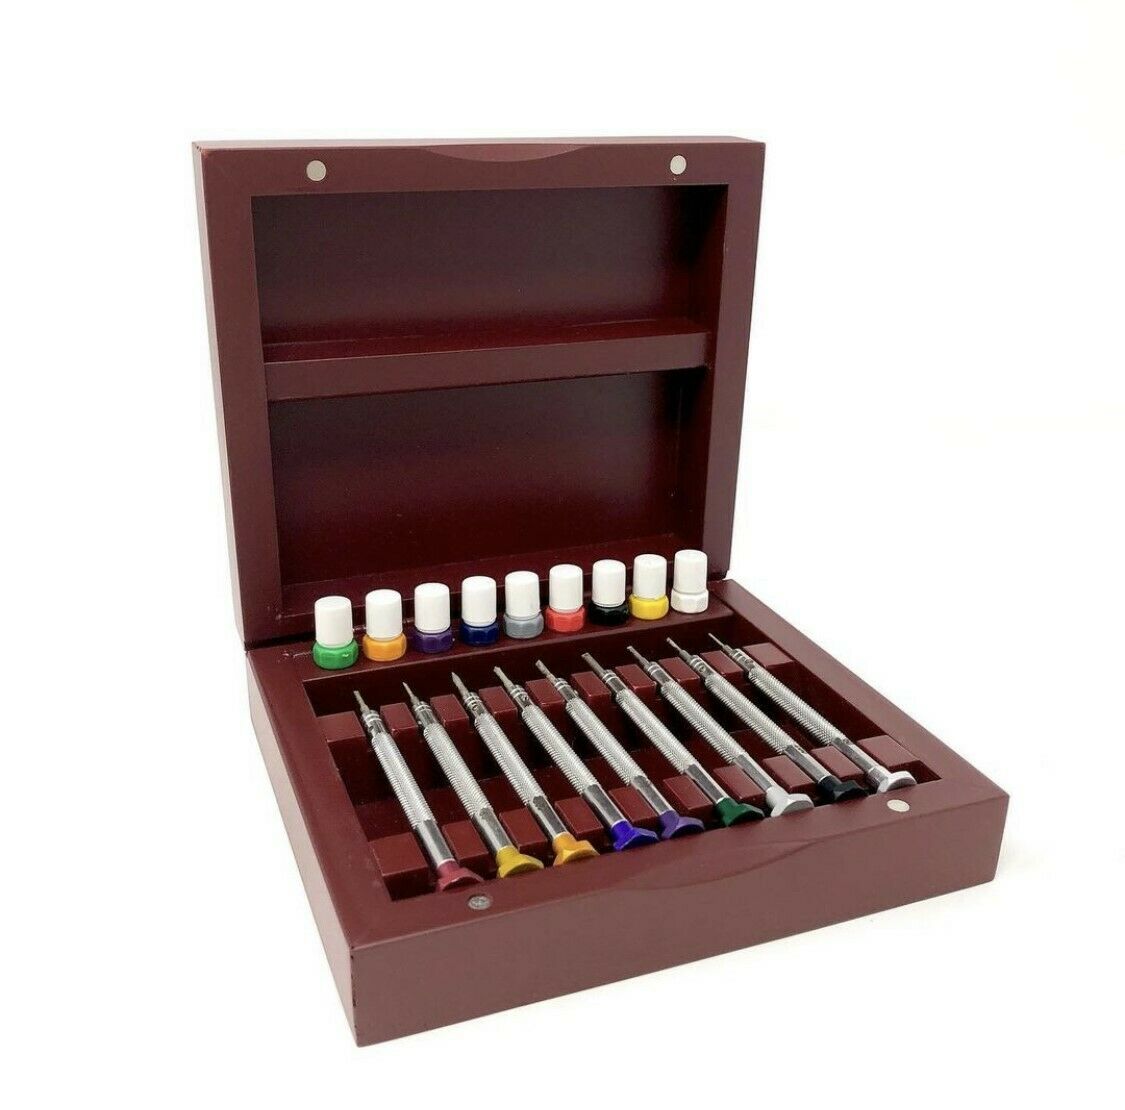 Euro Pro Screw Driver Set of 9 in Wood Box with Anodised Colour Coded Heads 194007455069 2 - Maddisons UK